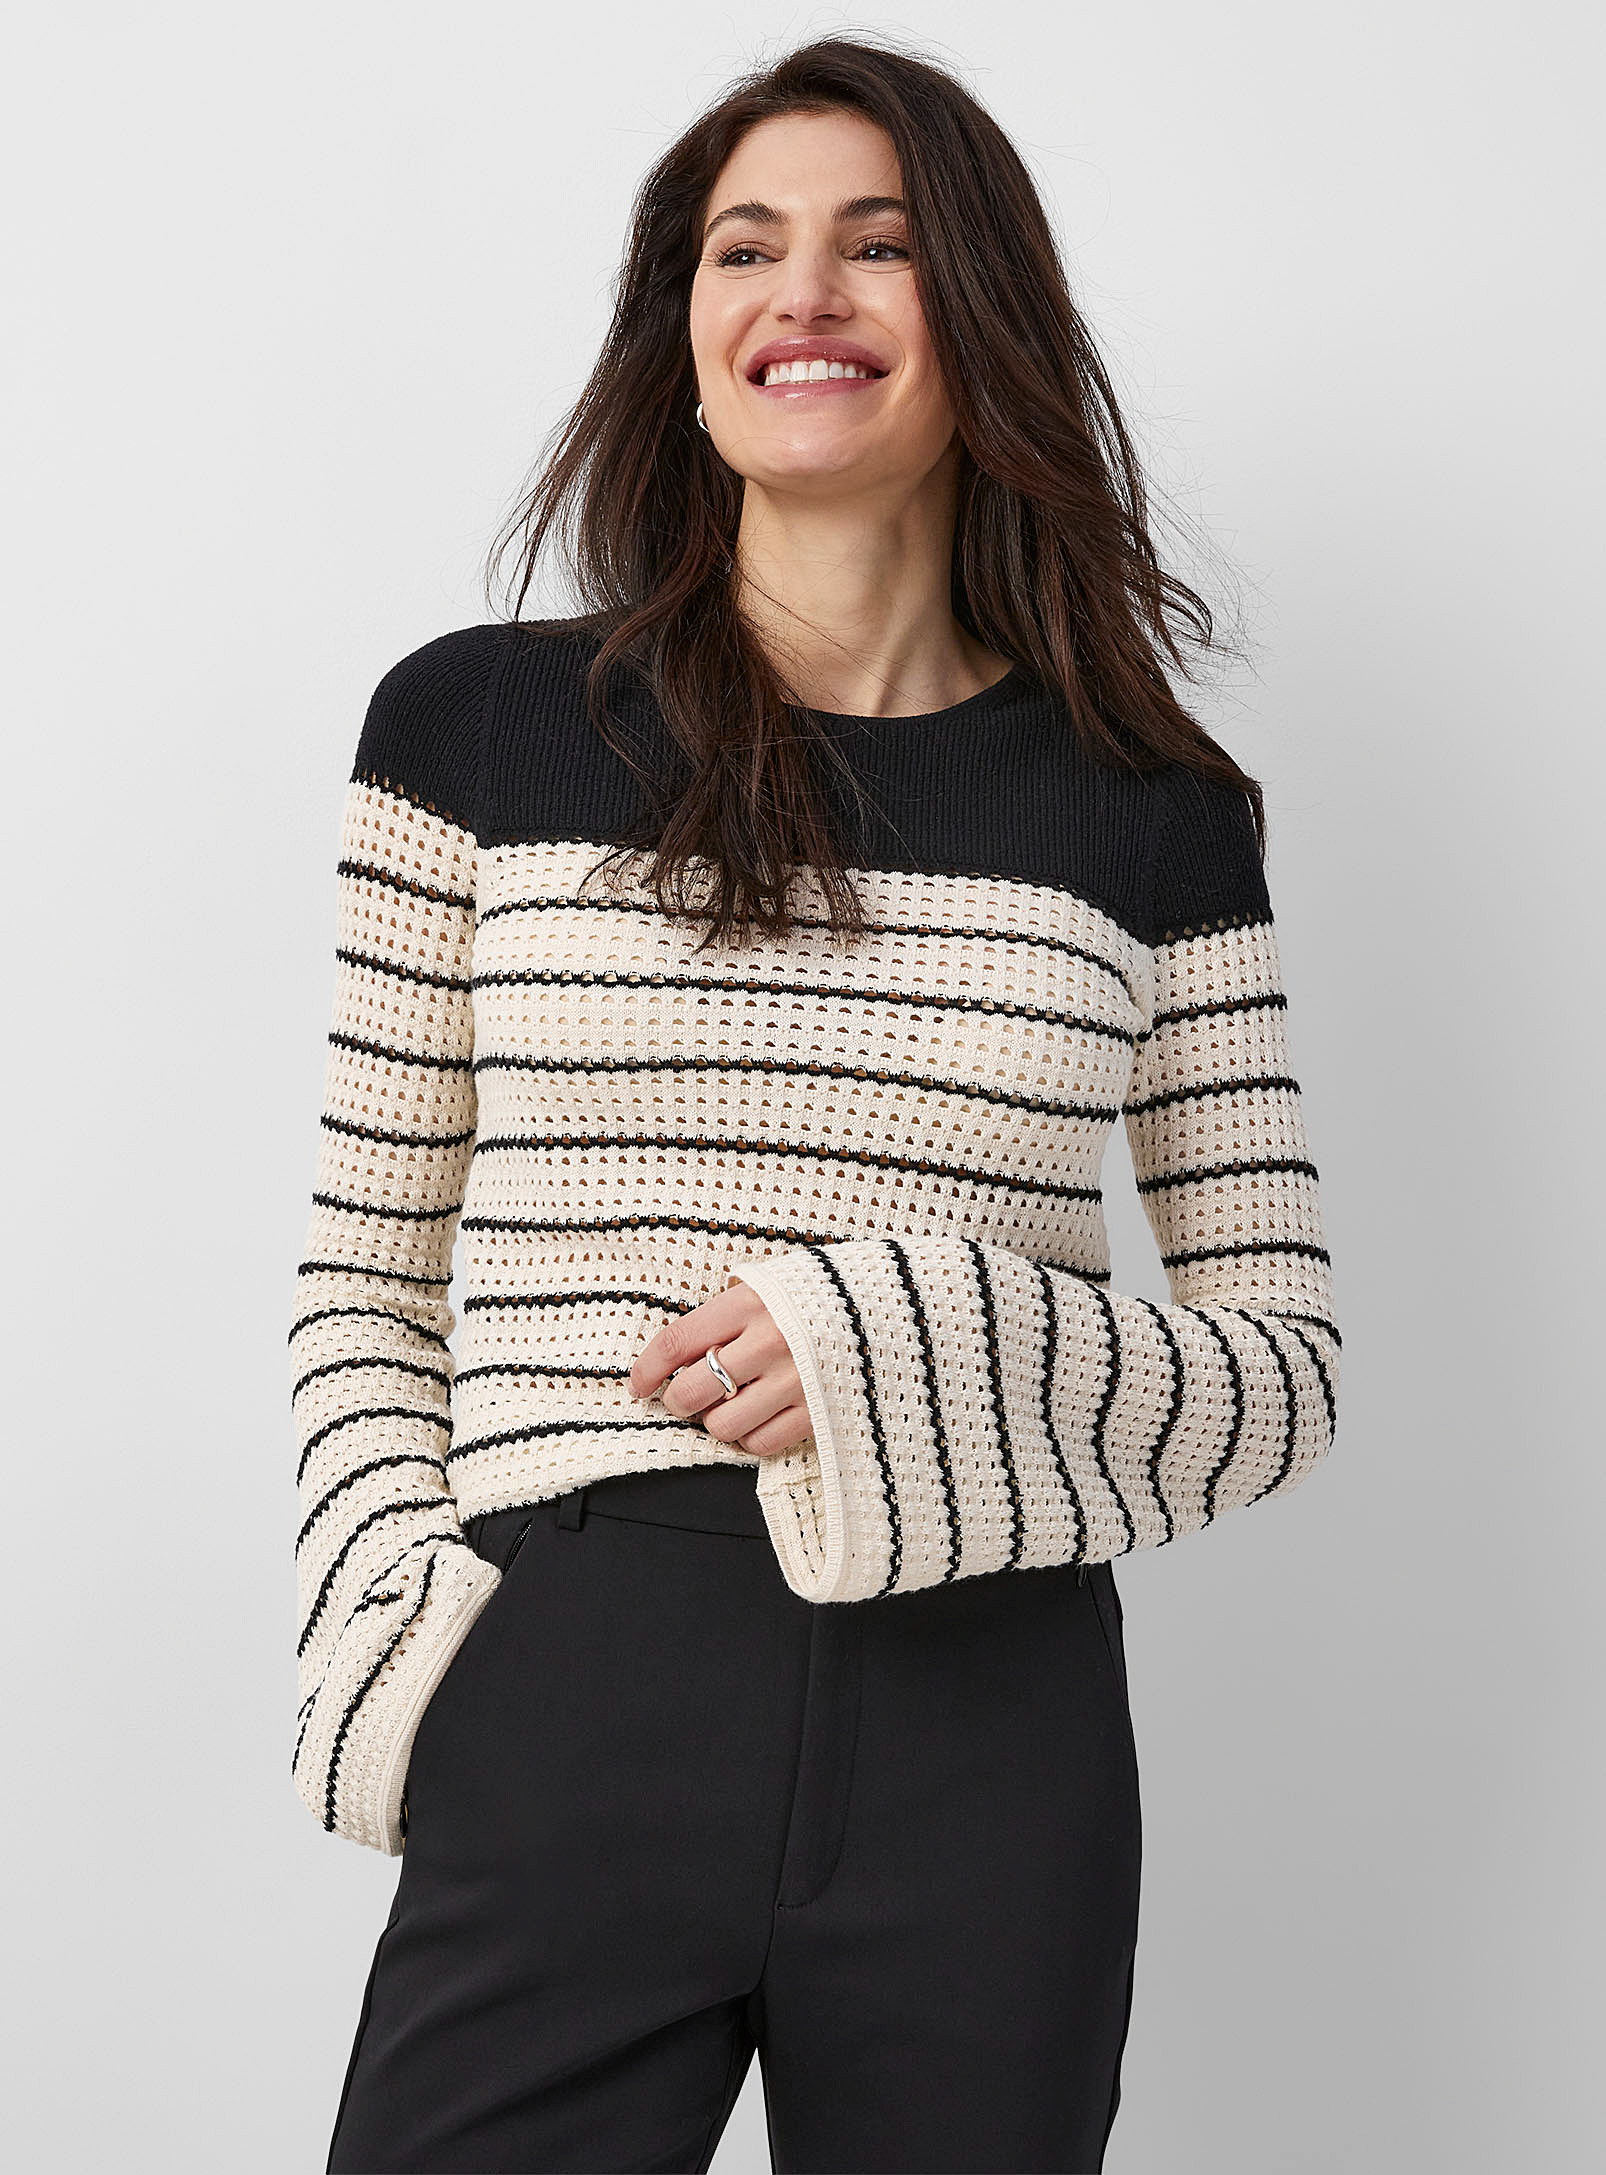 Inwear Malone Openwork And Stripes Sweater In Patterned White